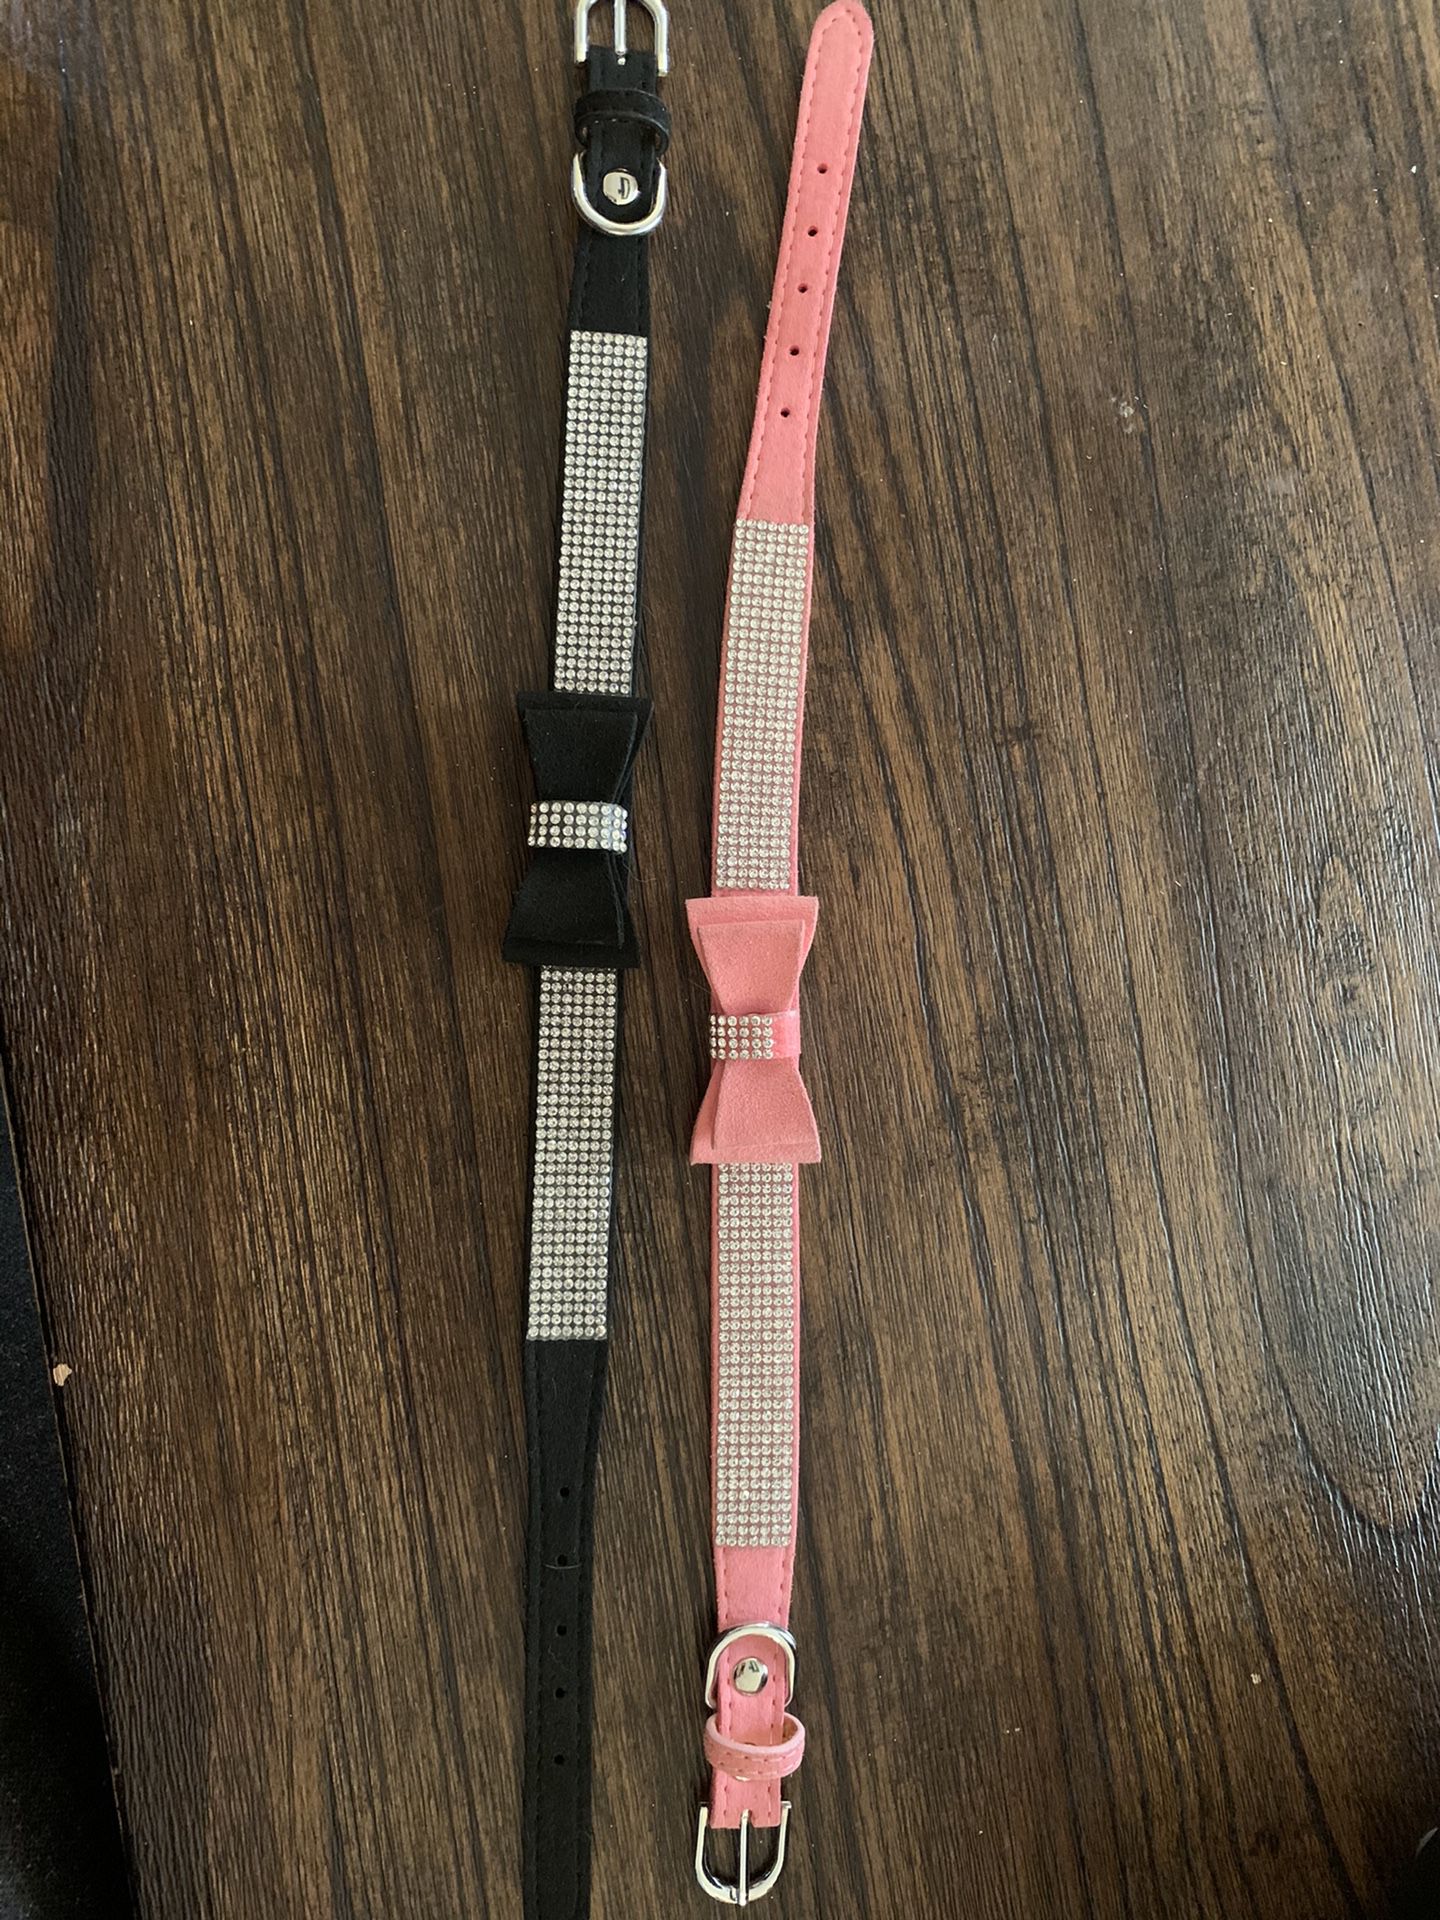 2 collars one new one used S/M Dog